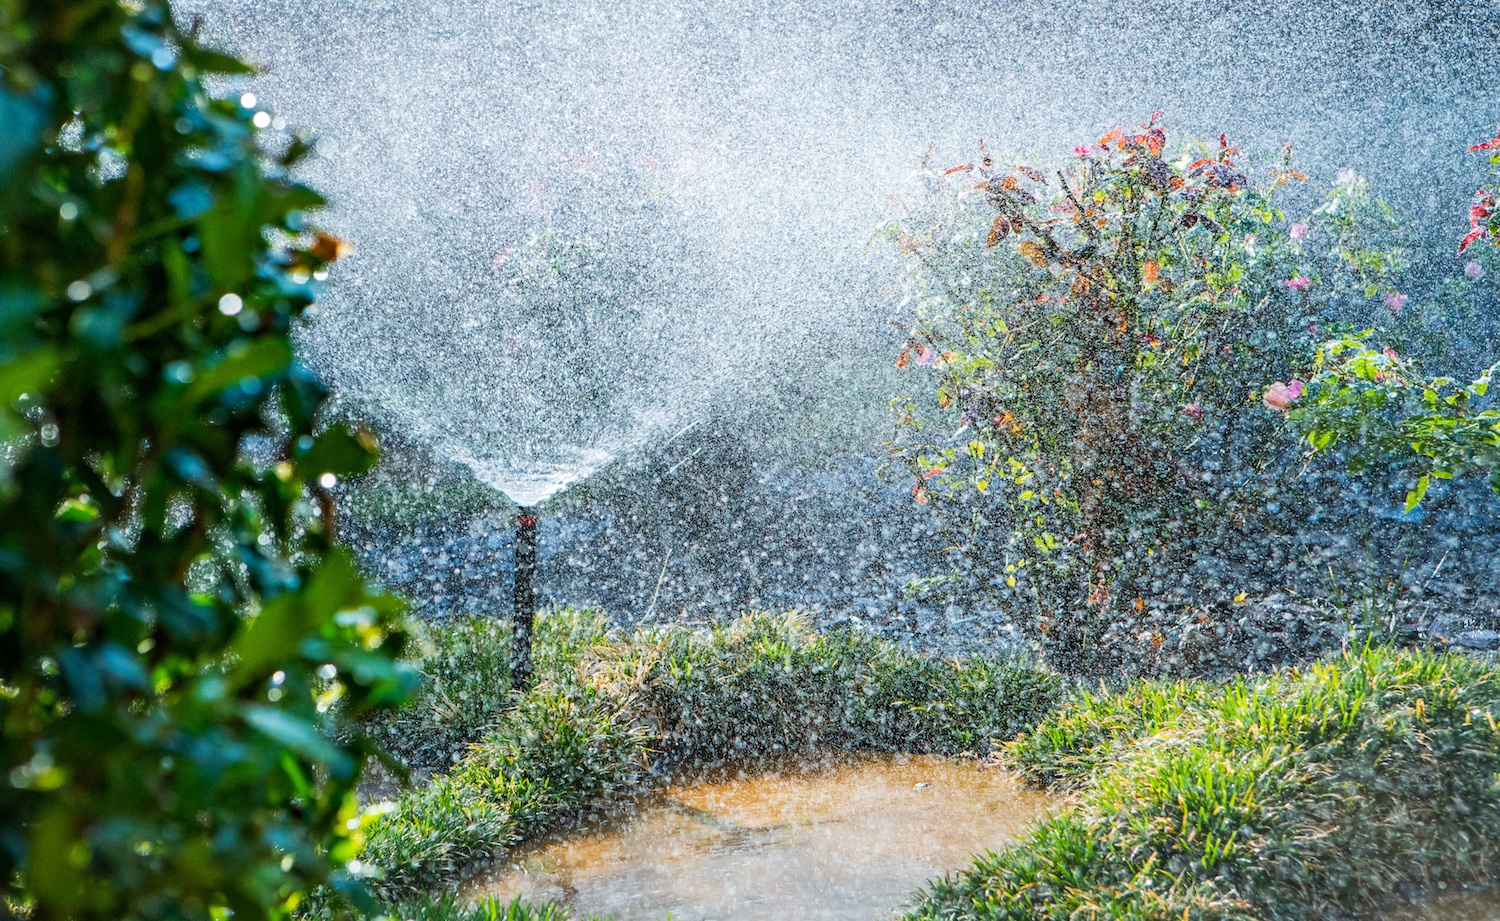 What Should Be Included in an Irrigation System Audit?